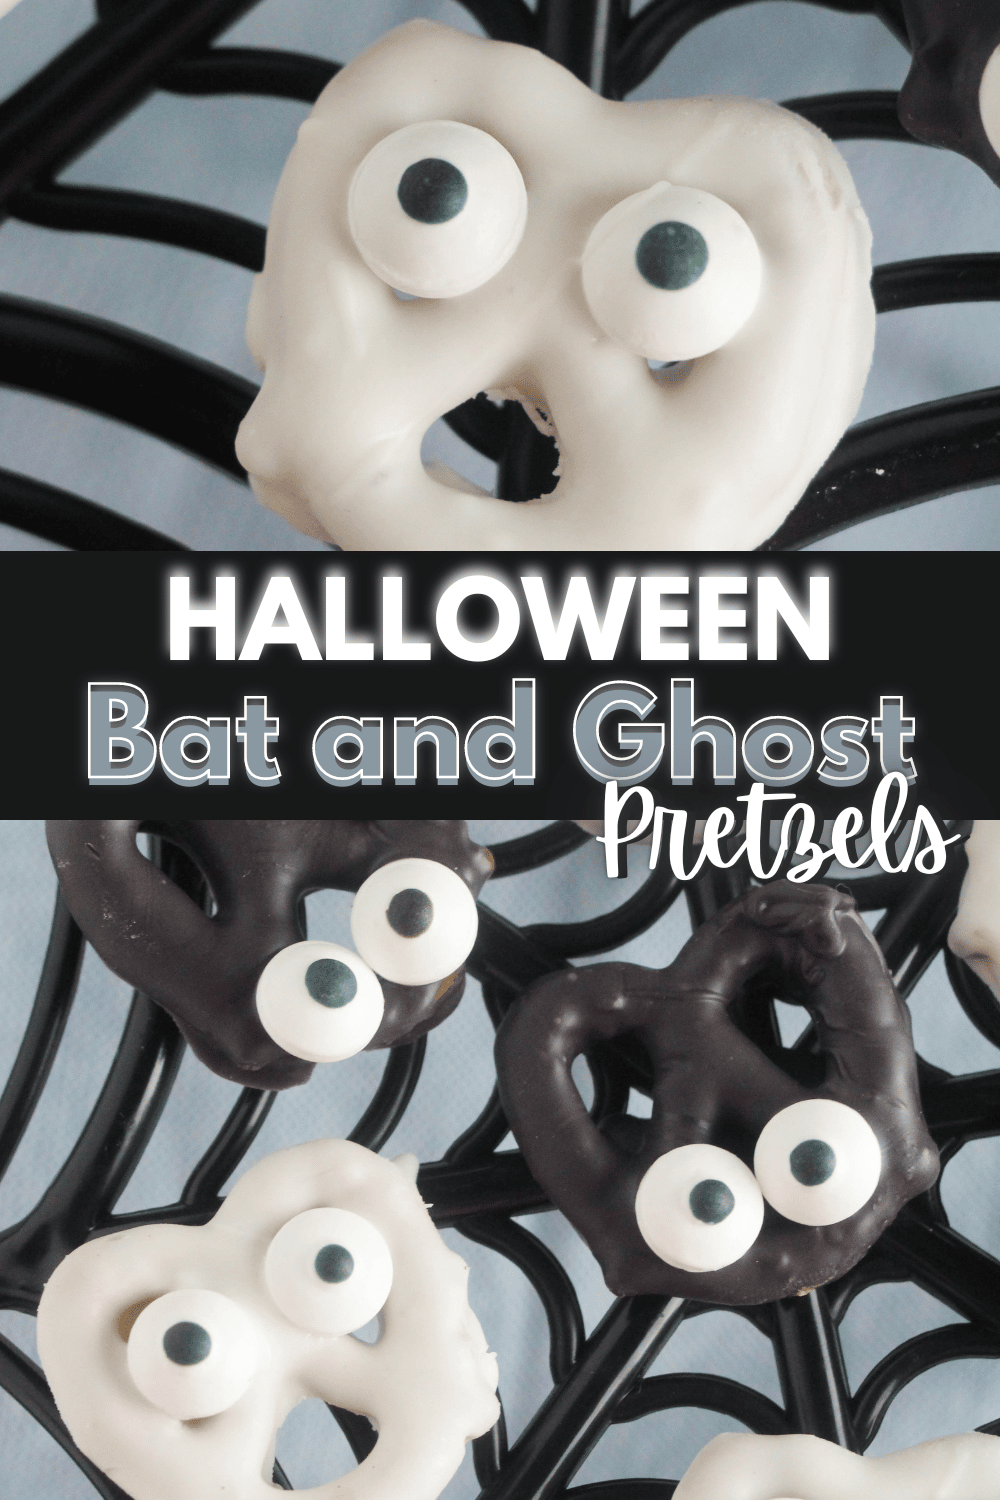 These Halloween Bat and Ghost Pretzels are so easy and fun to make! This is a tasty snack that your kids will love. #ghostpretzels #halloween #halloweensnack #batpretzels via @wondermomwannab